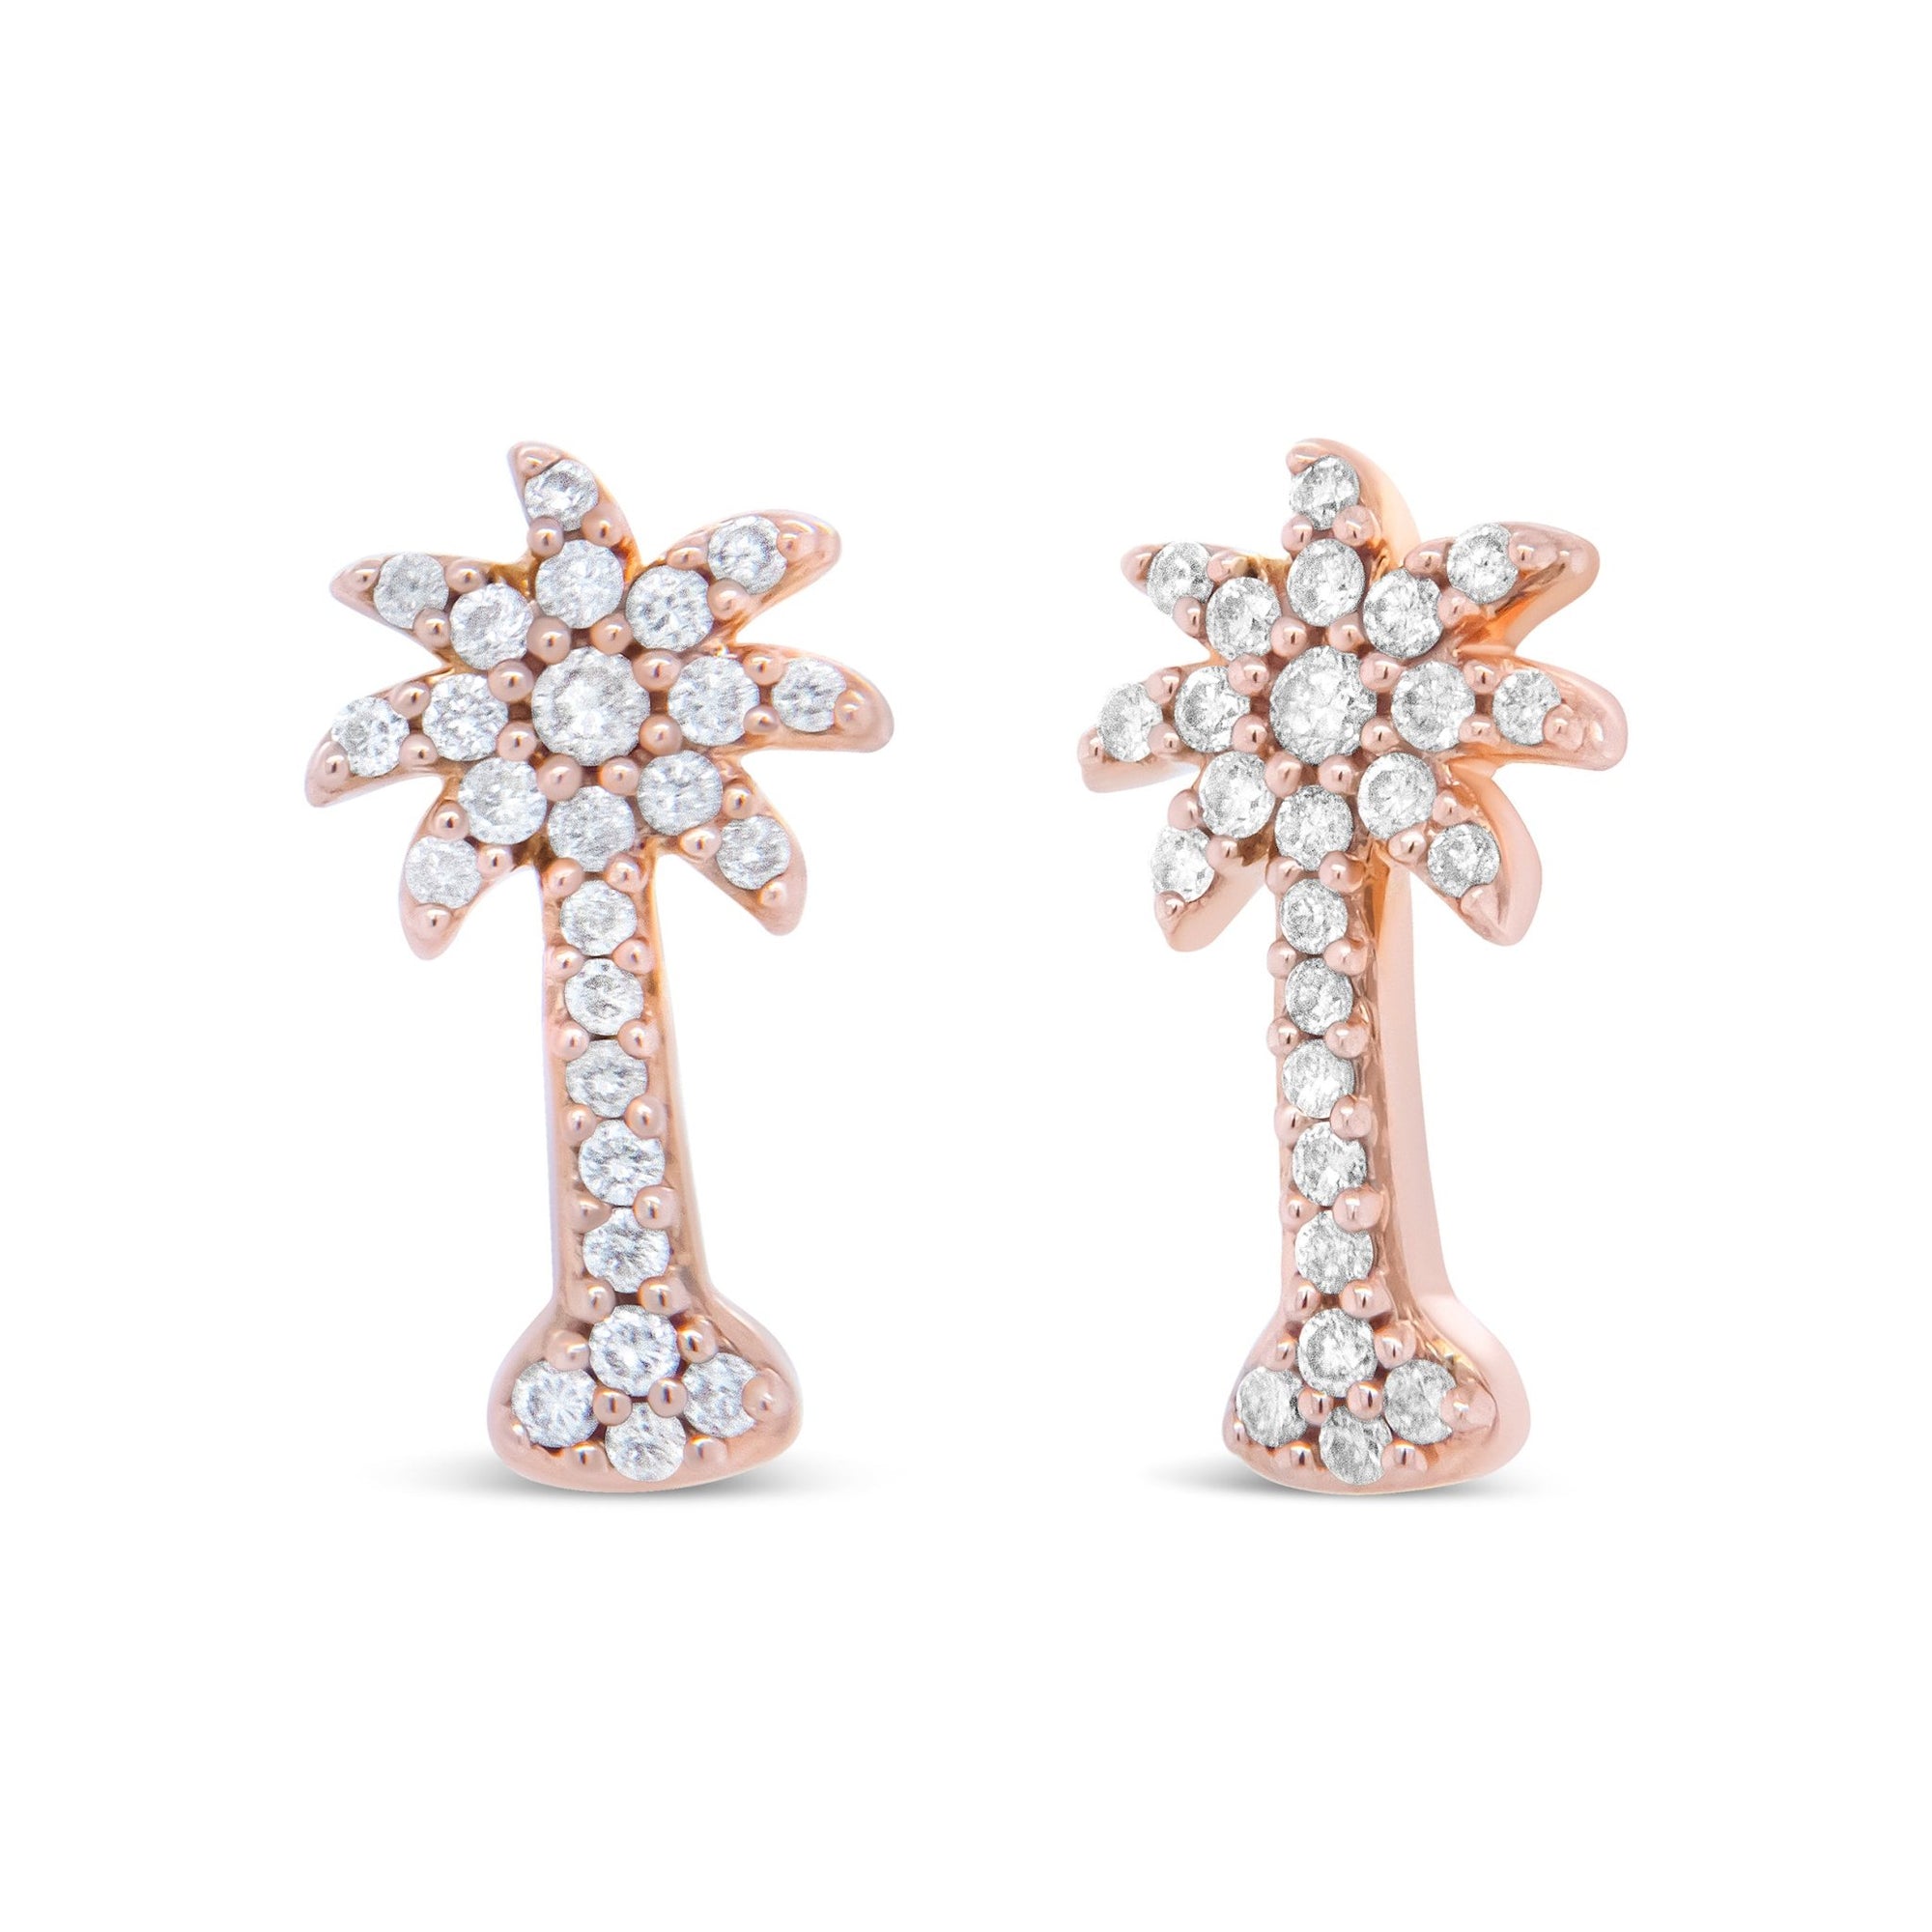 10K Rose Gold 1/4 Cttw Diamond Palm Tree Push Back Stud Earrings (H-I Color, I1-I2 Clarity) - LinkagejewelrydesignLinkagejewelrydesign